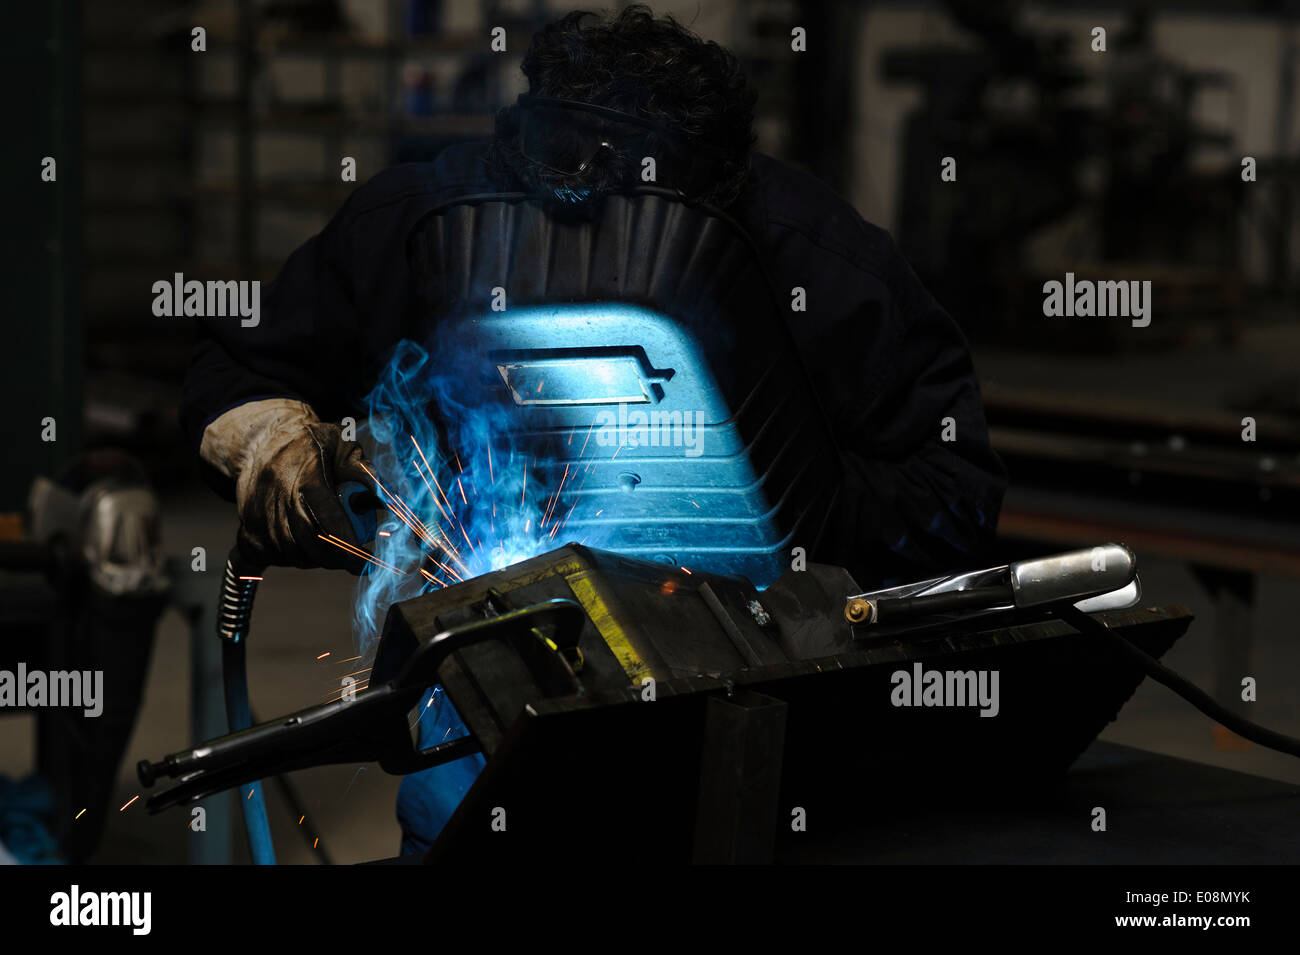 Man welding with safety mask Stock Photo